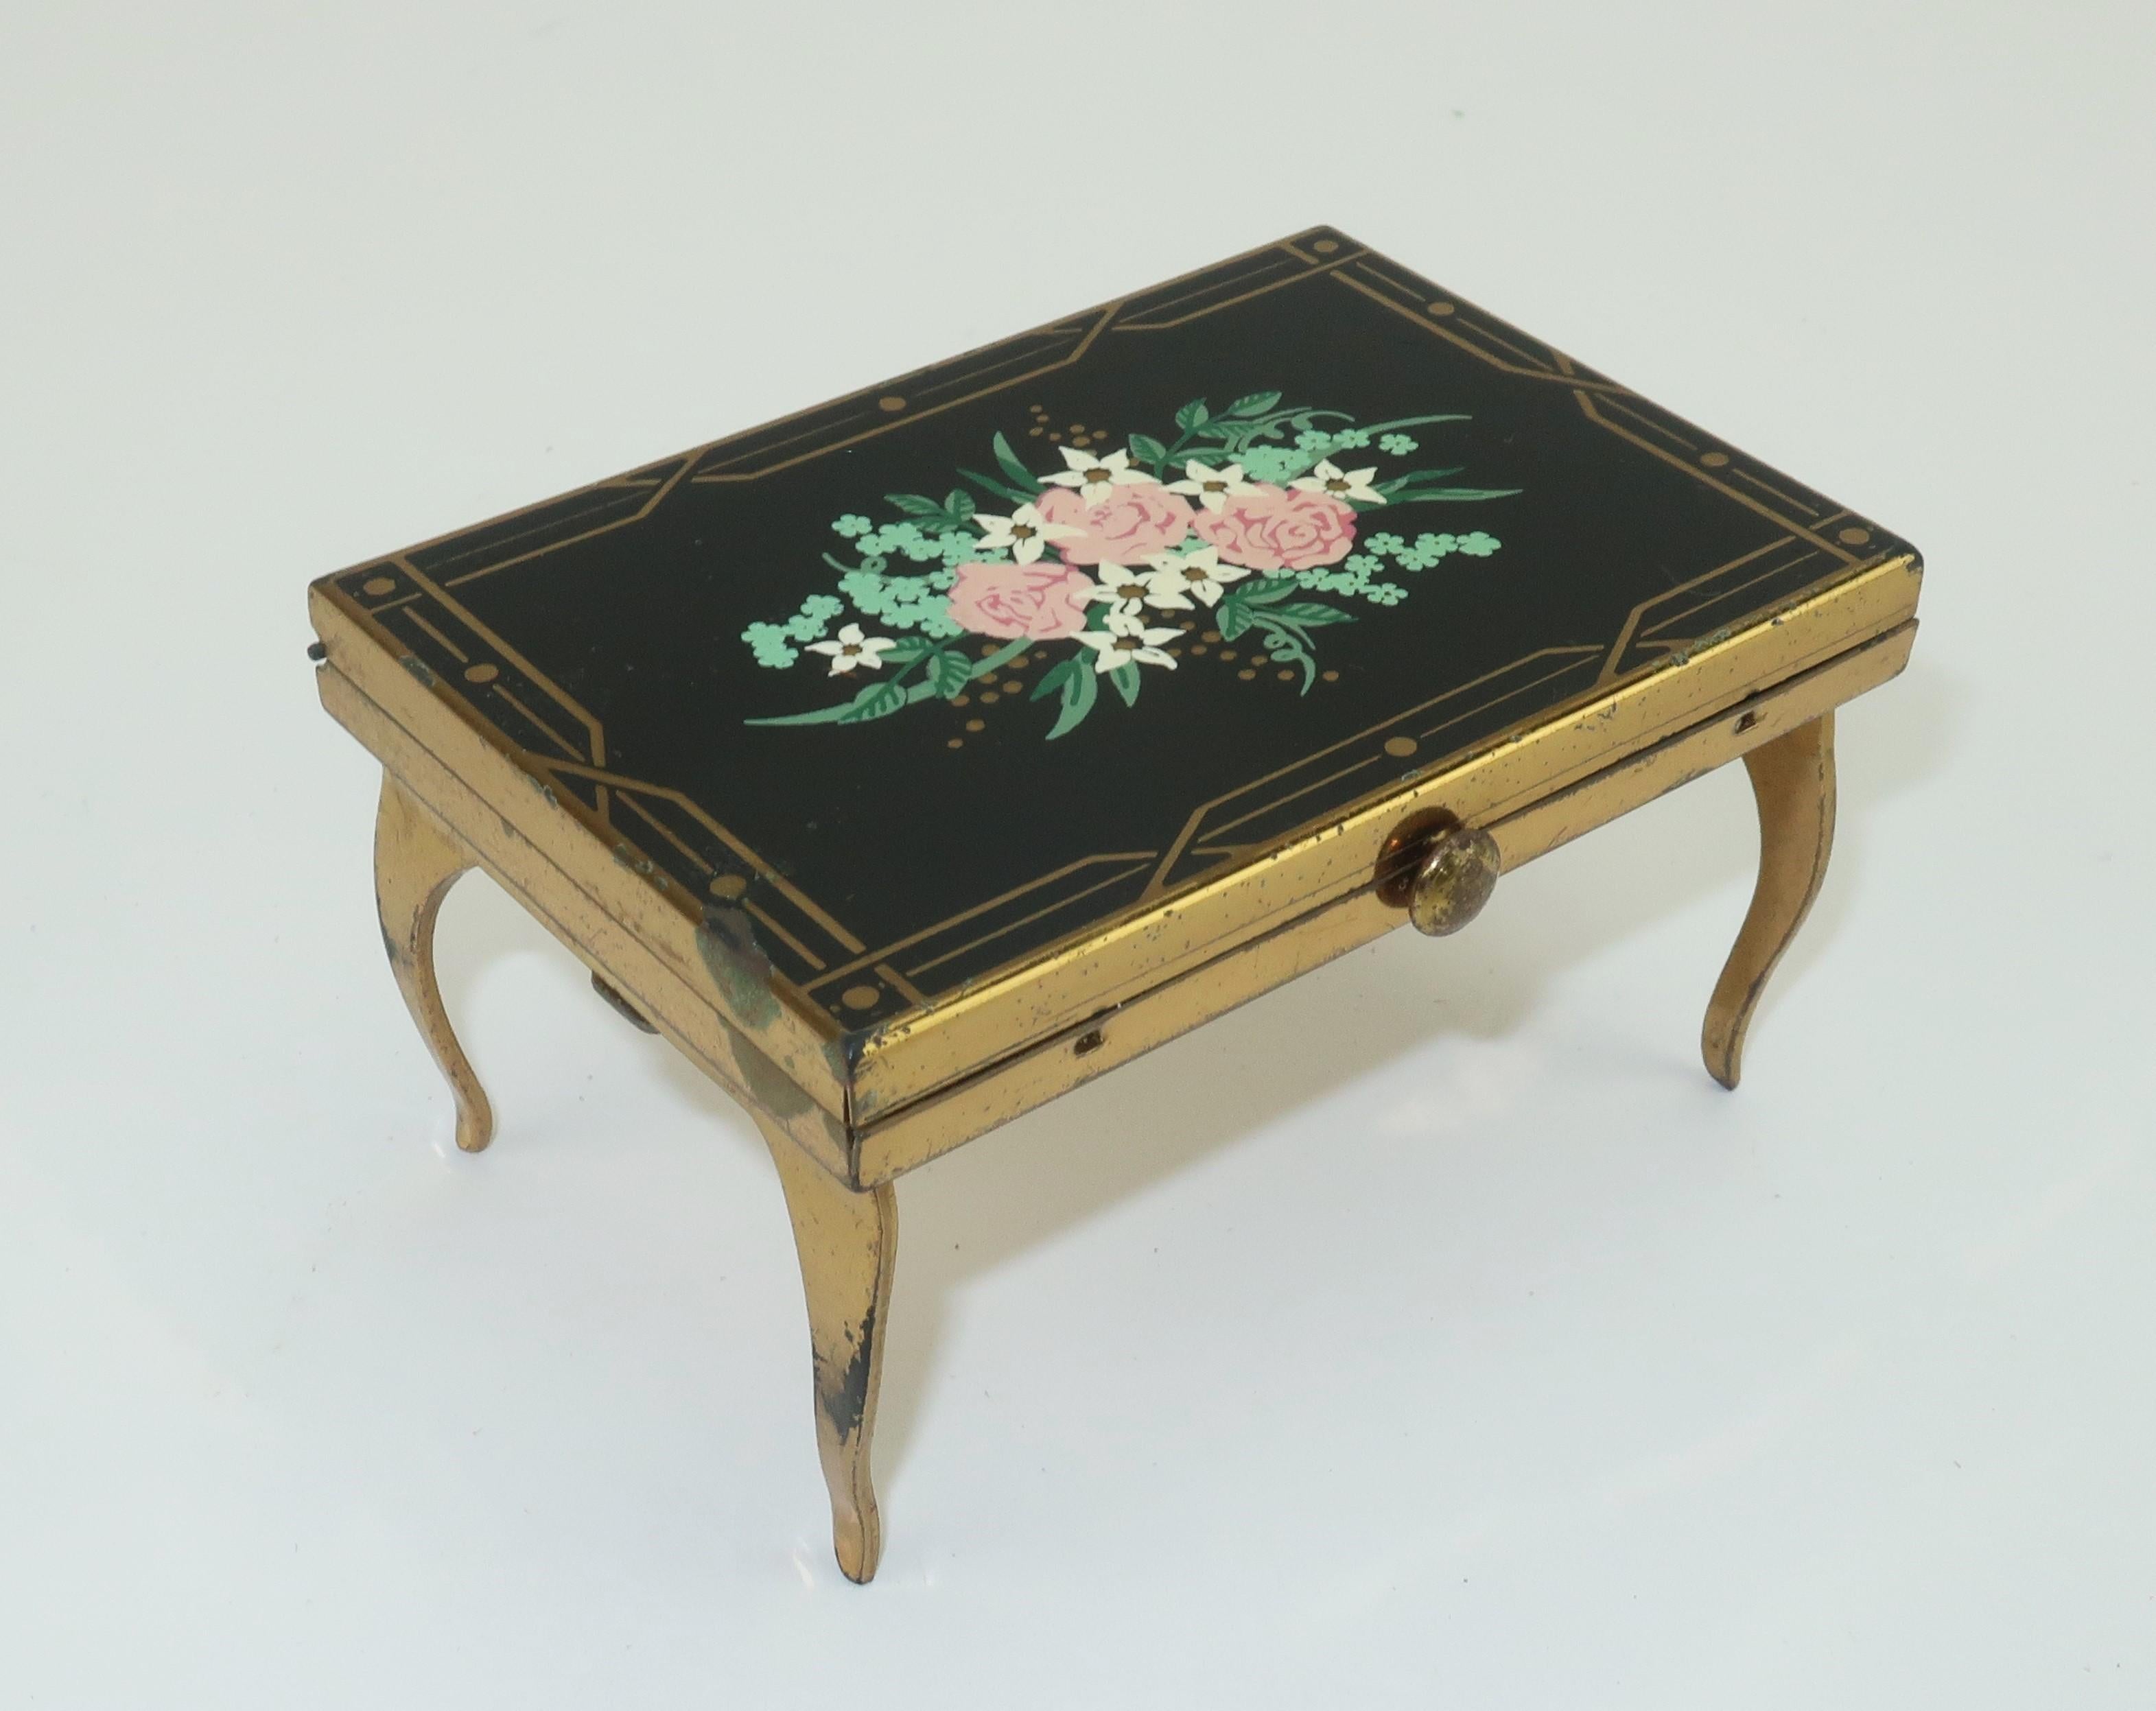 Adorable C.1950 Wadsworth powder compact with a black painted enamel top accented by flowers in shades of pink, white and green. This special compact has a secret … it is actually masquerading as a miniature vanity table! The underside has a